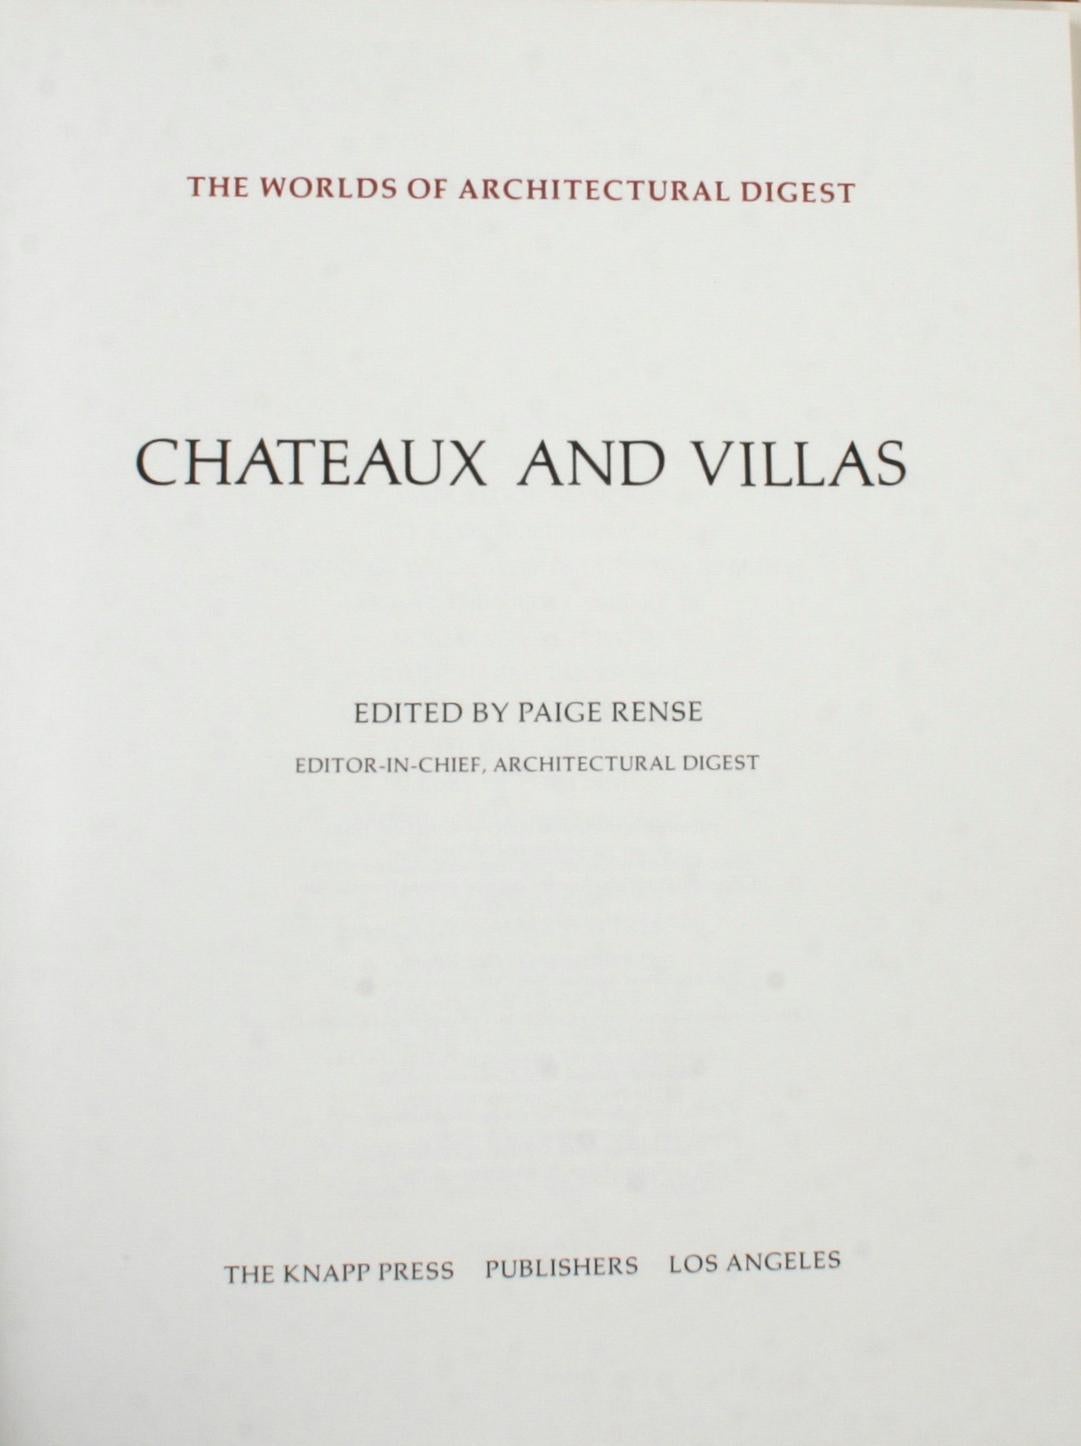 Architectural Digest Chateaux and Villas. Los Angeles: The Knapp Press Publishers, 1982. Stated first edition hardcover with dust jacket. 153 pp. Selection of Architectural Digest's historic interiors of chateaus and villas from all around the